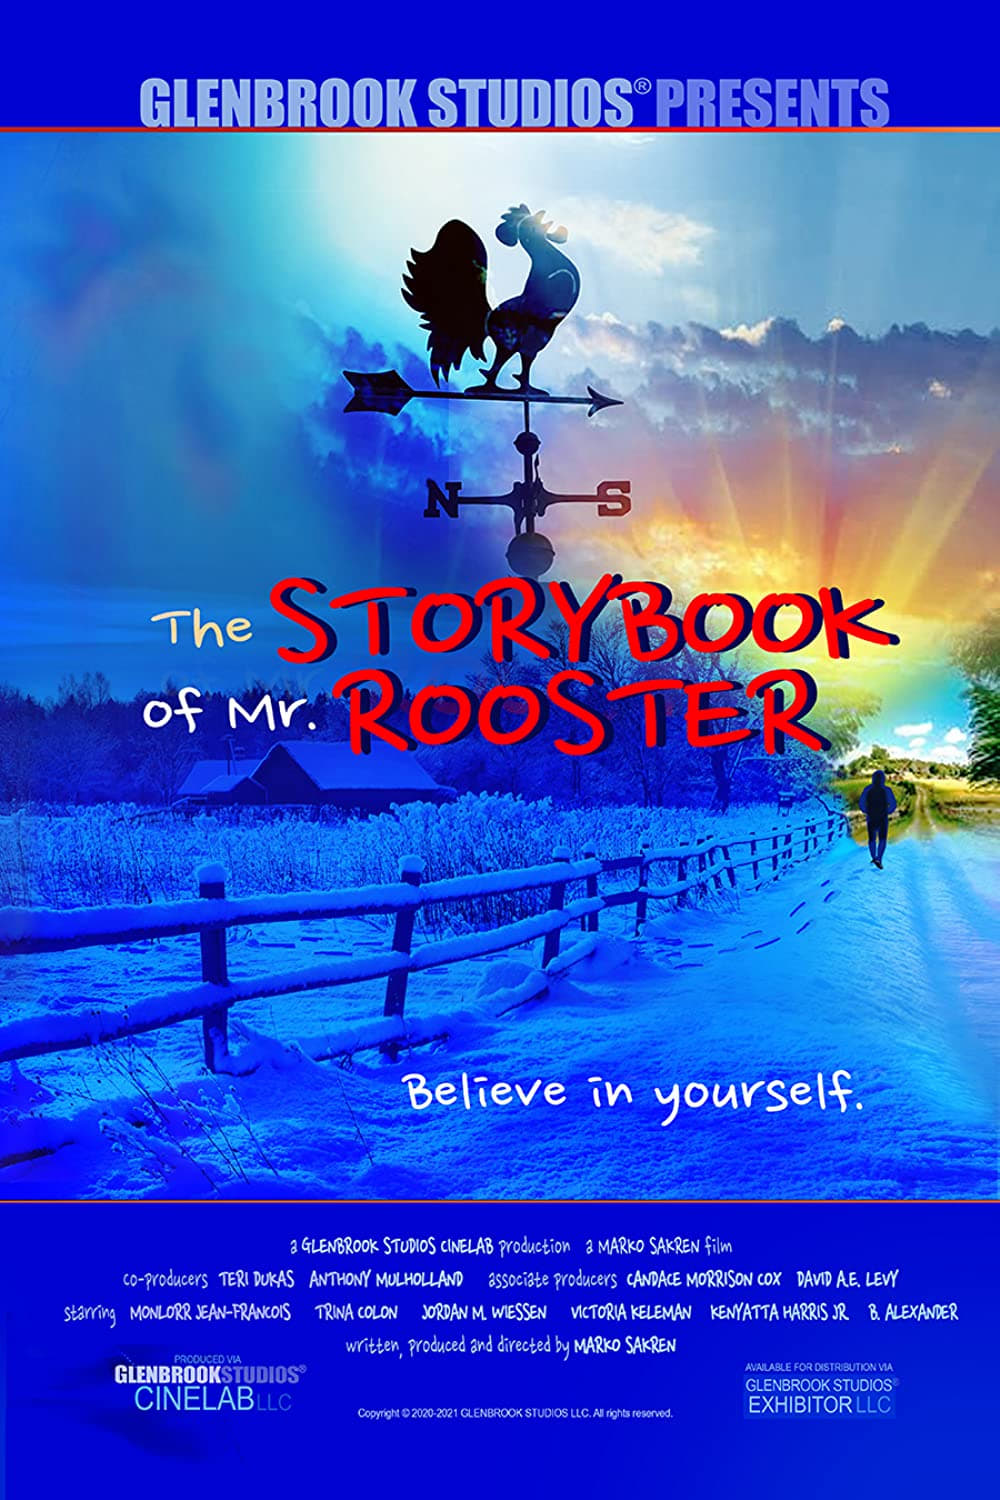 The Storybook of Mr. Rooster